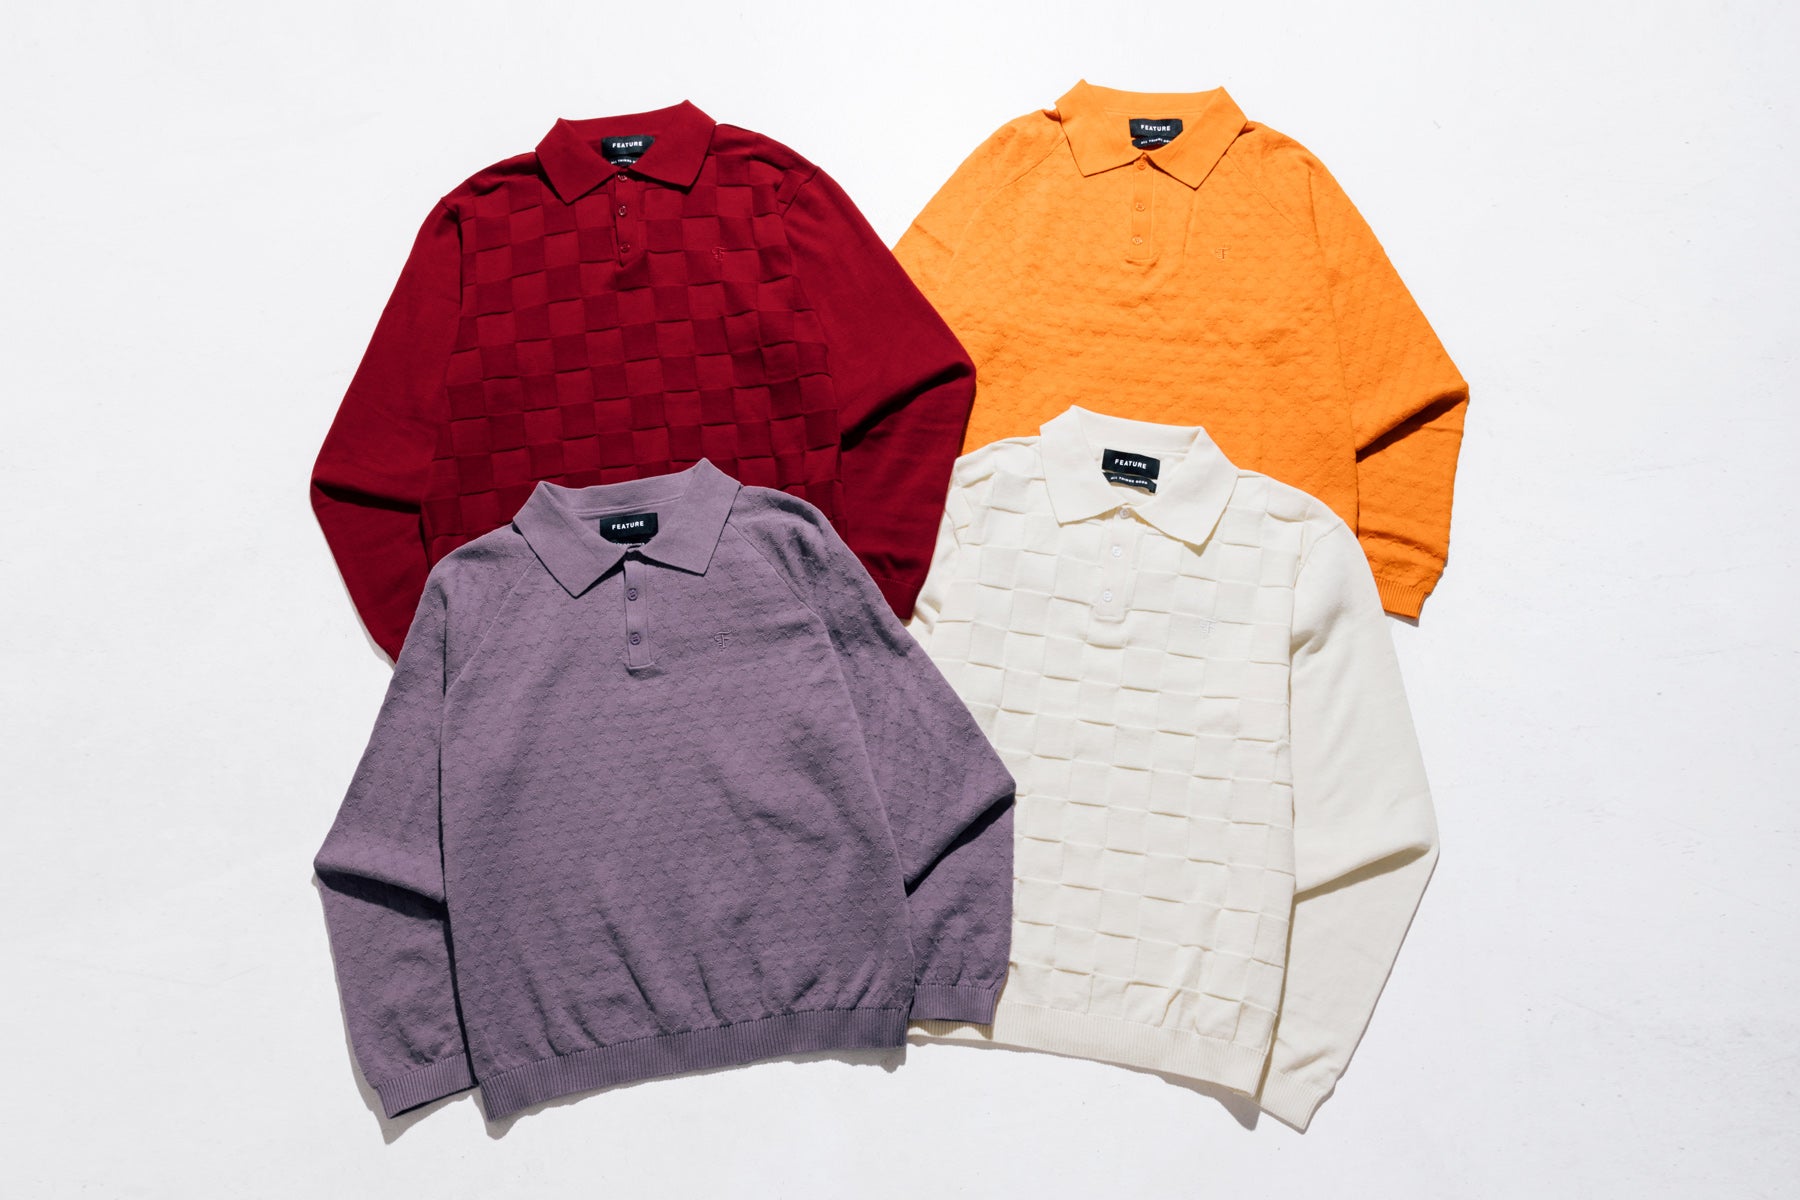 Presenting Sweater Polos in New Bright Shades